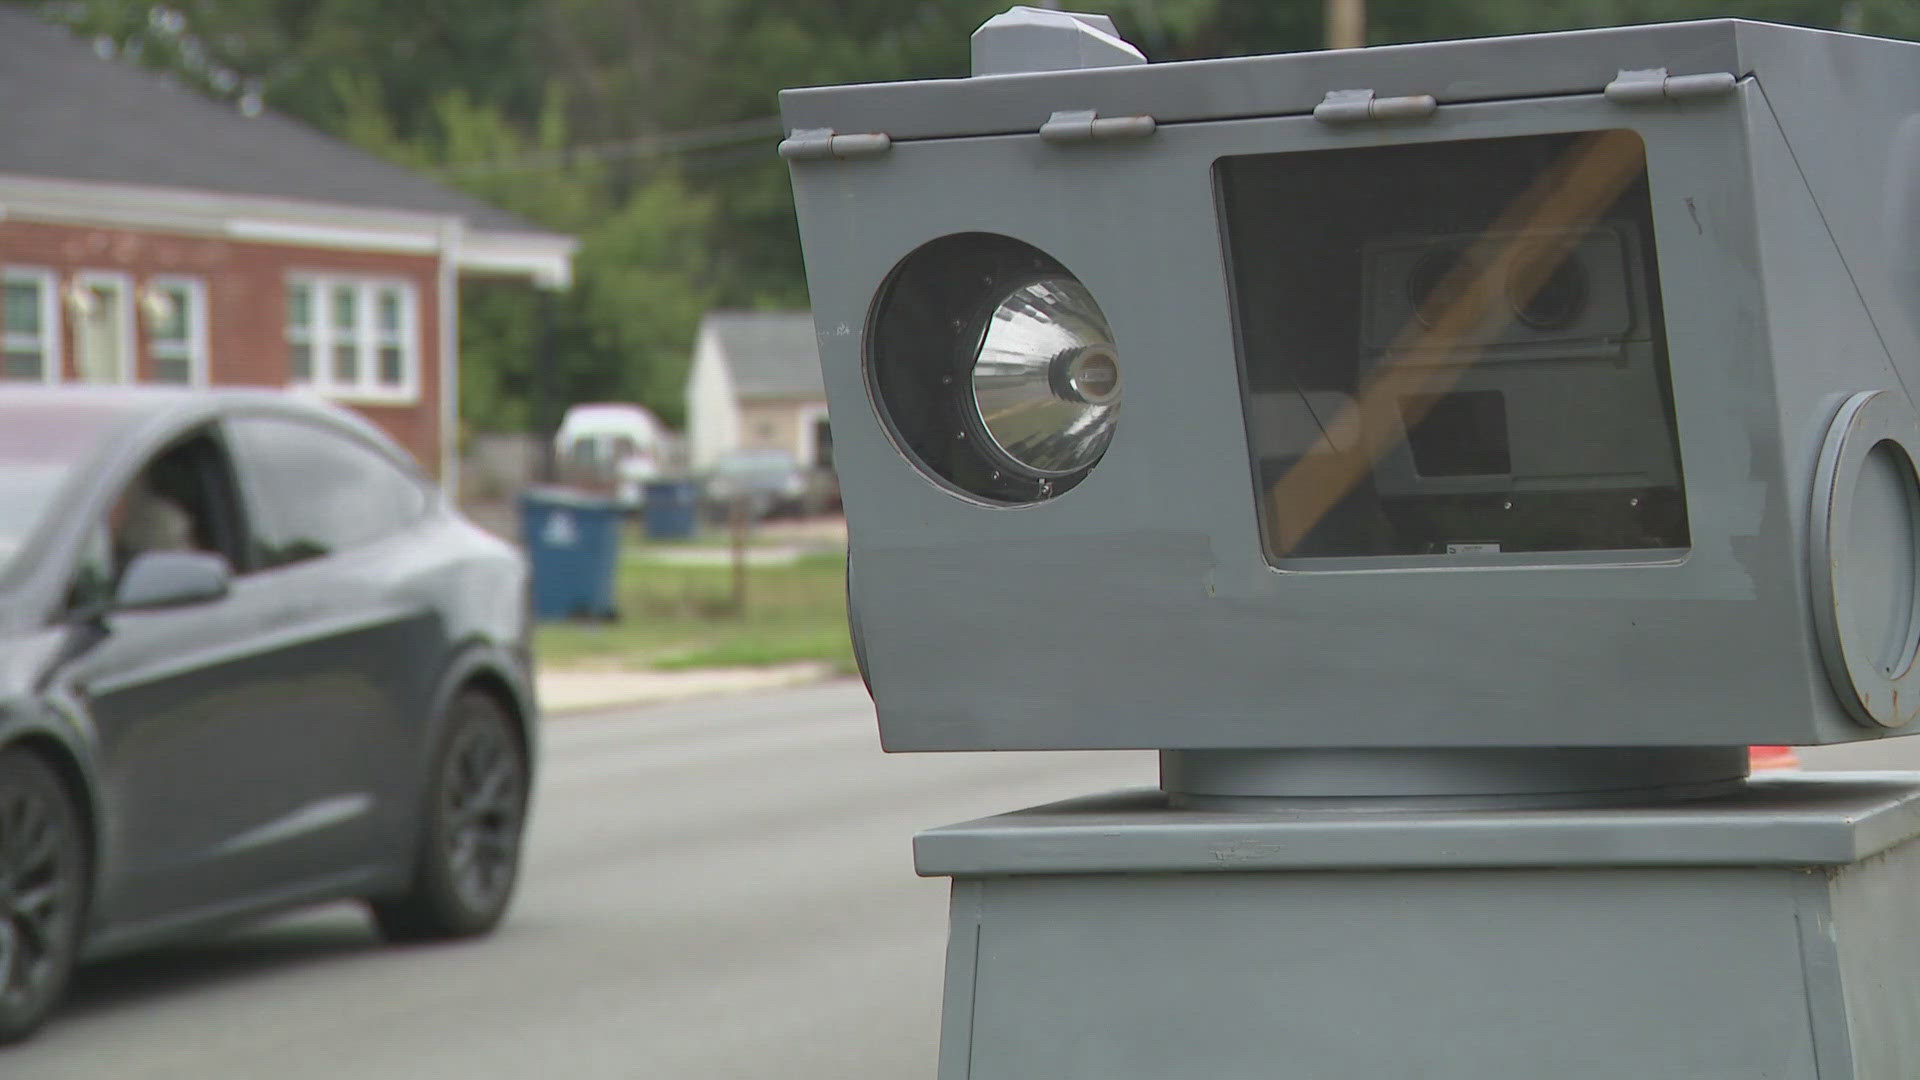 IF YOU'RE DRIVING IN FAIRFAX COUNTY, YOU MAY HAVE PASSED BY ONE OF THE SCHOOL ZONE SPEED CAMERAS.